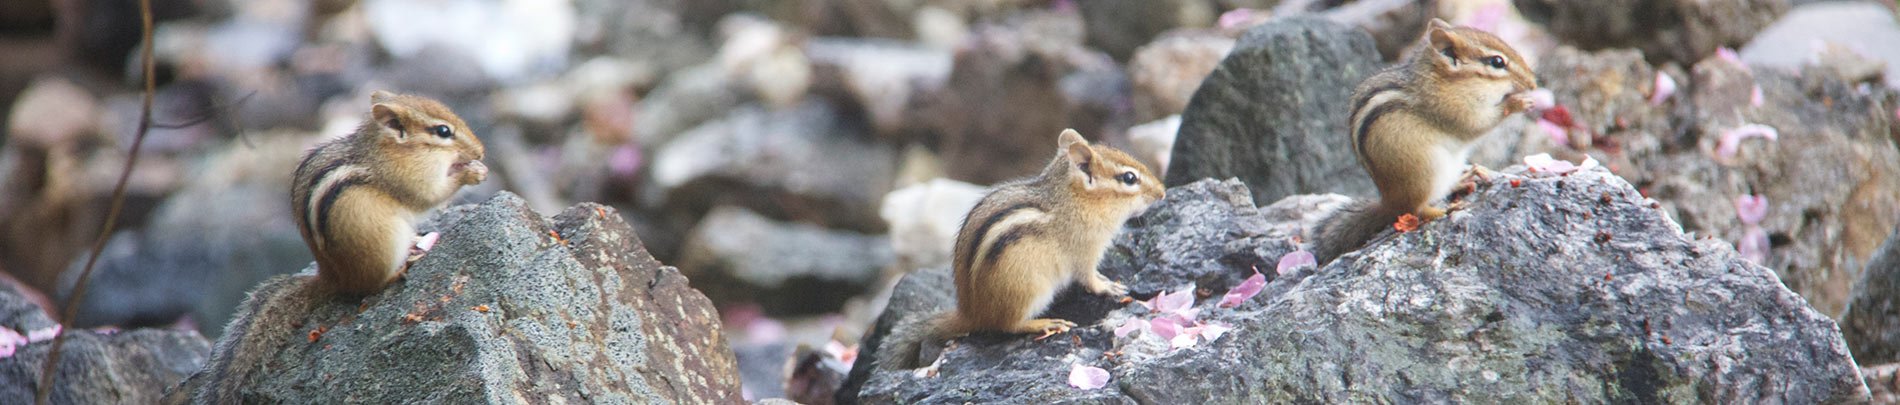 A family of chipmunks sit on some rocks.